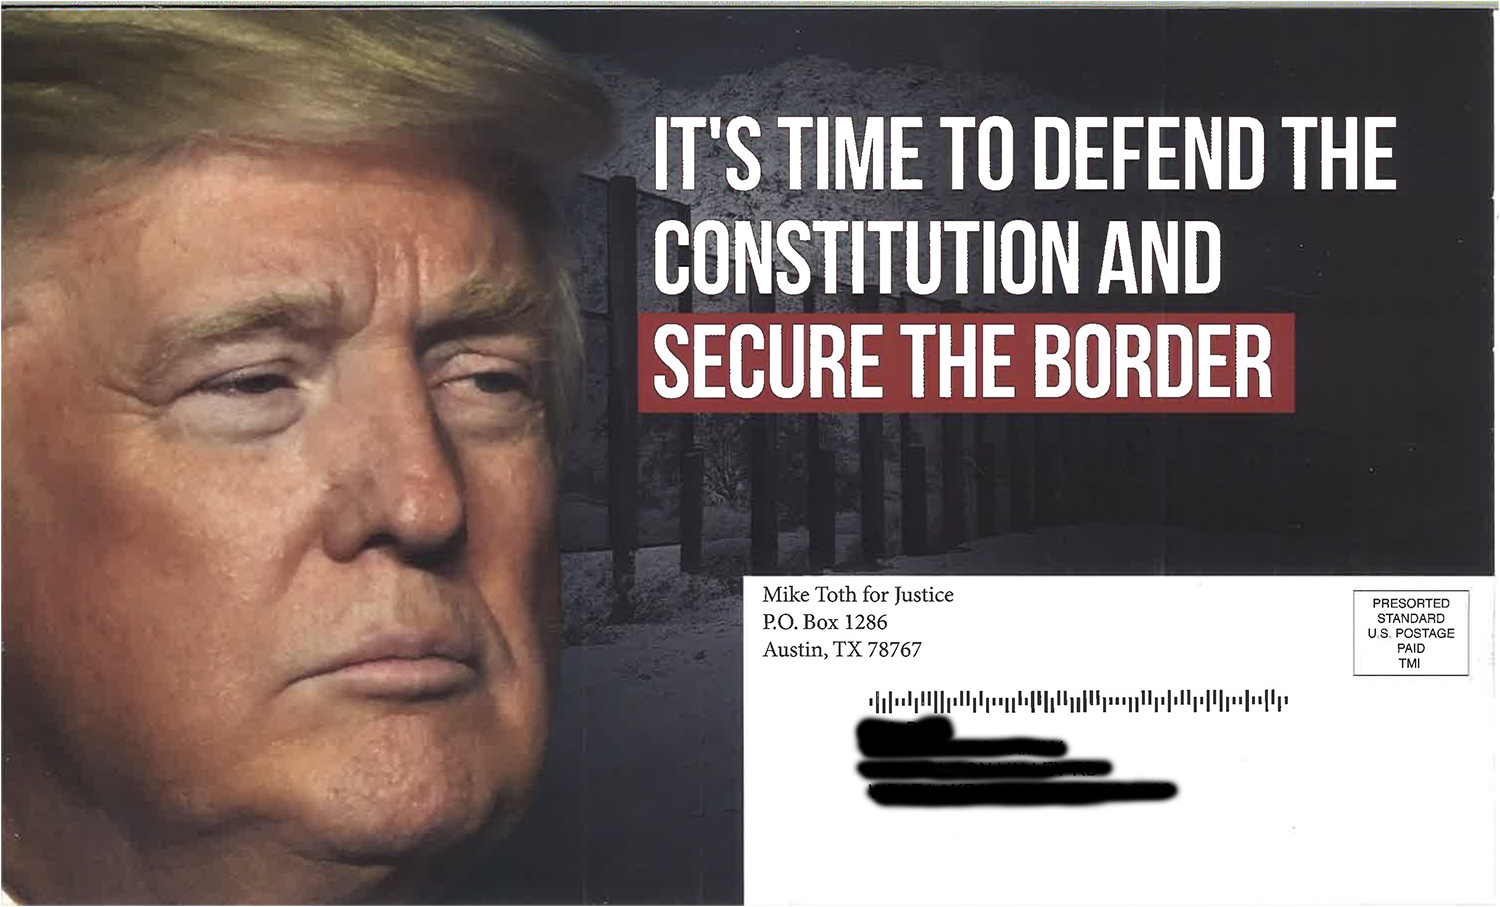 Republican court candidate Mike Toth, going beyond the typical tactic of promoting a certain judicial philosophy, is openly embracing Donald Trump and hot-button social issues in his race for the 3rd Court of Appeals. This is one side of a recent mail advertisement he sent out.